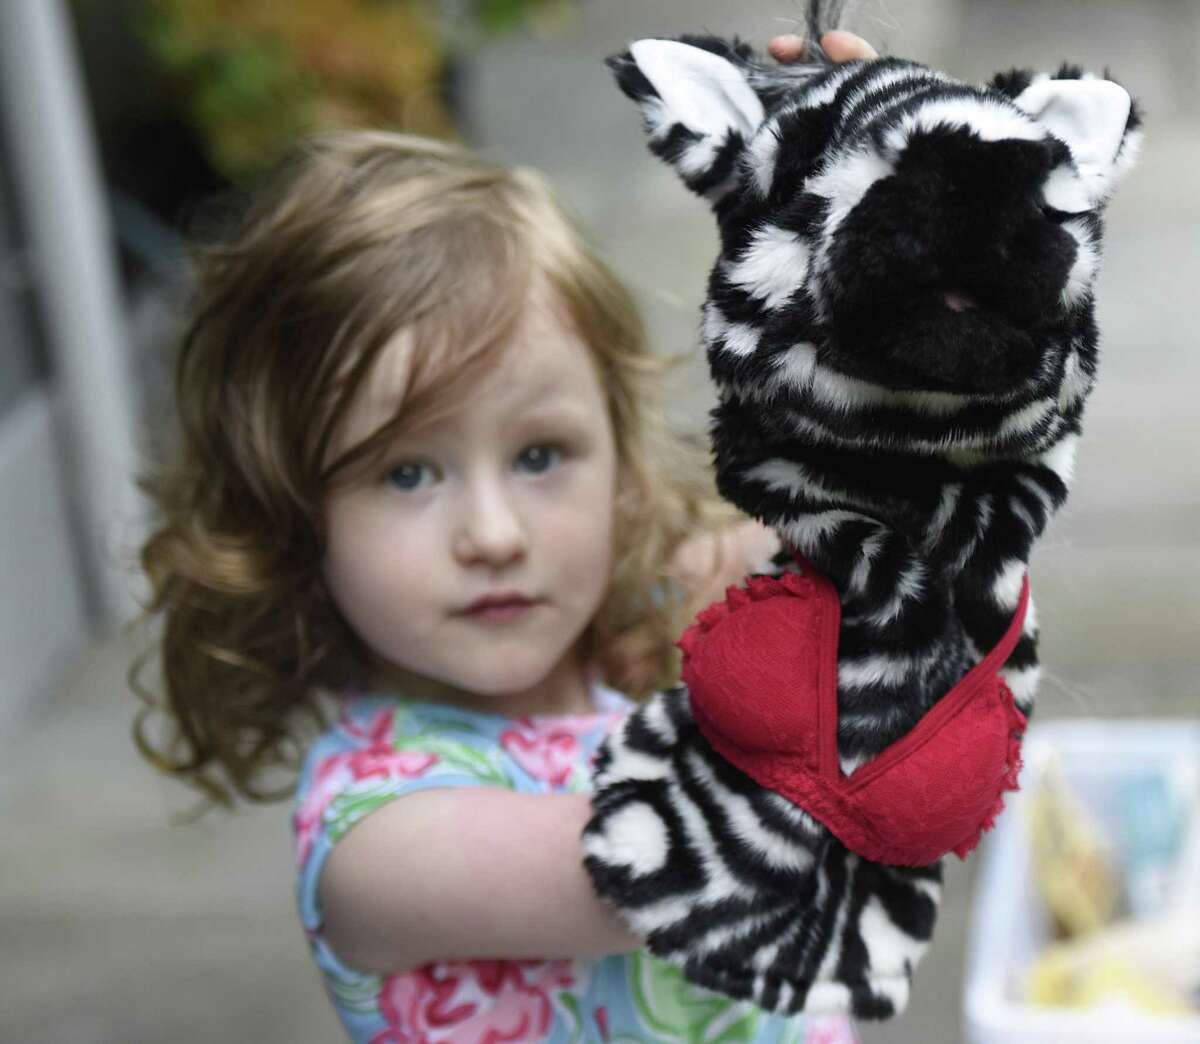 Henley Belle Johnson, 3, plays with a zebra puppet wearing a bra, a reference to her new kids joke book "What Underwear Does A Zebra Wear?" at her home in Greenwich, Conn. Monday, Aug. 6, 2018. Henley and her mother, Elle Muliarchyk, came up with jokes in the new book, which was released in early July and has become an Amazon bestselling children's joke book. Muliarchyk said of the zebra’s bra, “By the way, it’s Calvin Klein. At first, I made it flat, but it wasn’t that funny. I made it a C-cup, because I wanted to make it more relatable.”